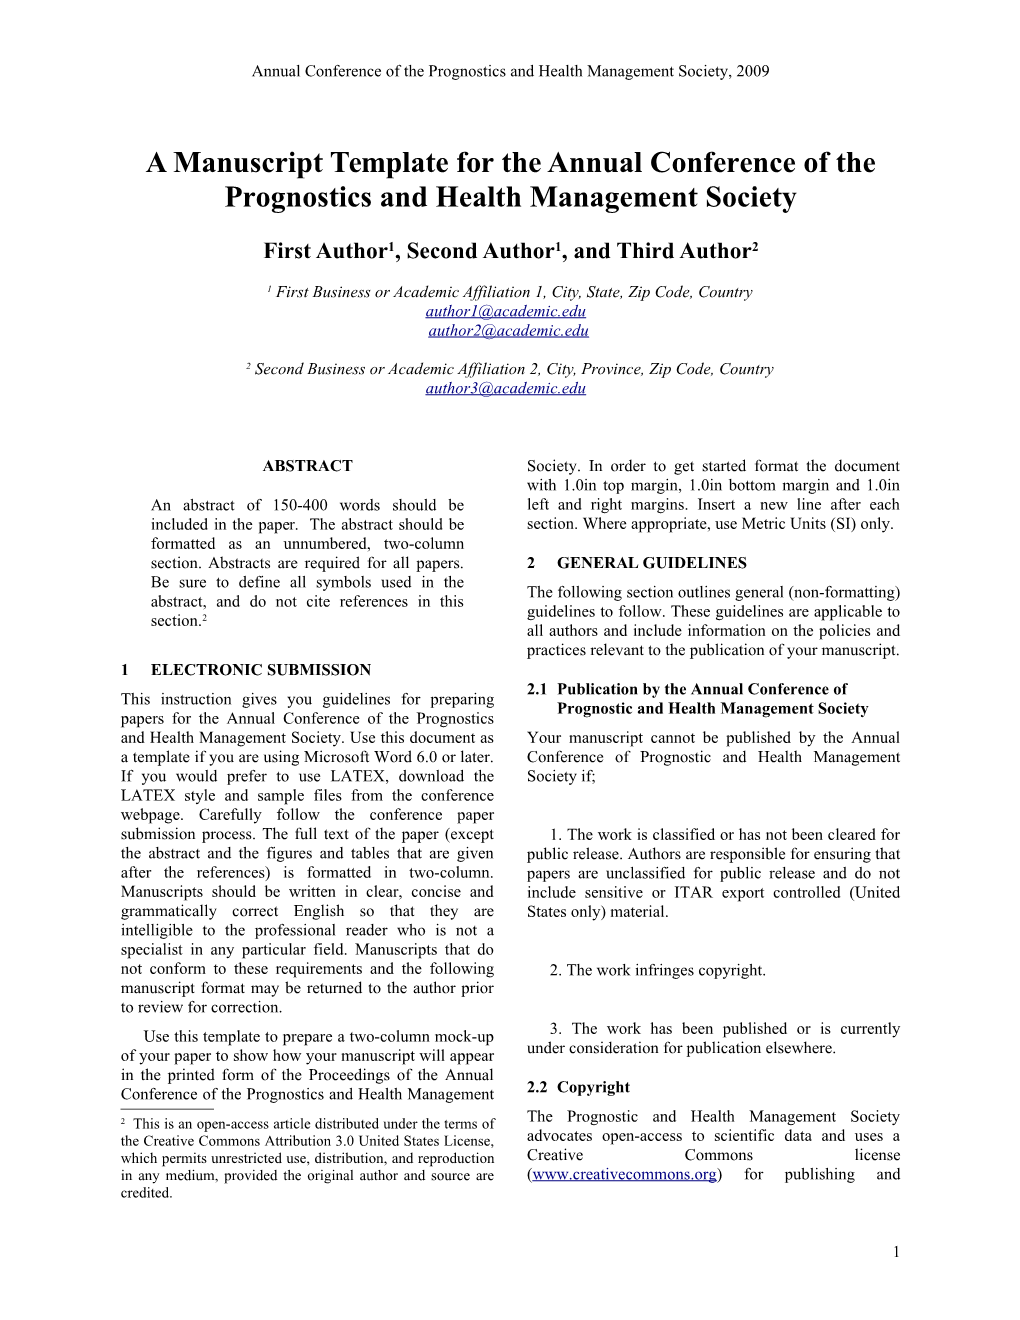 A Manuscript Template for the Annual Conference of Prognostics and Health Management Society